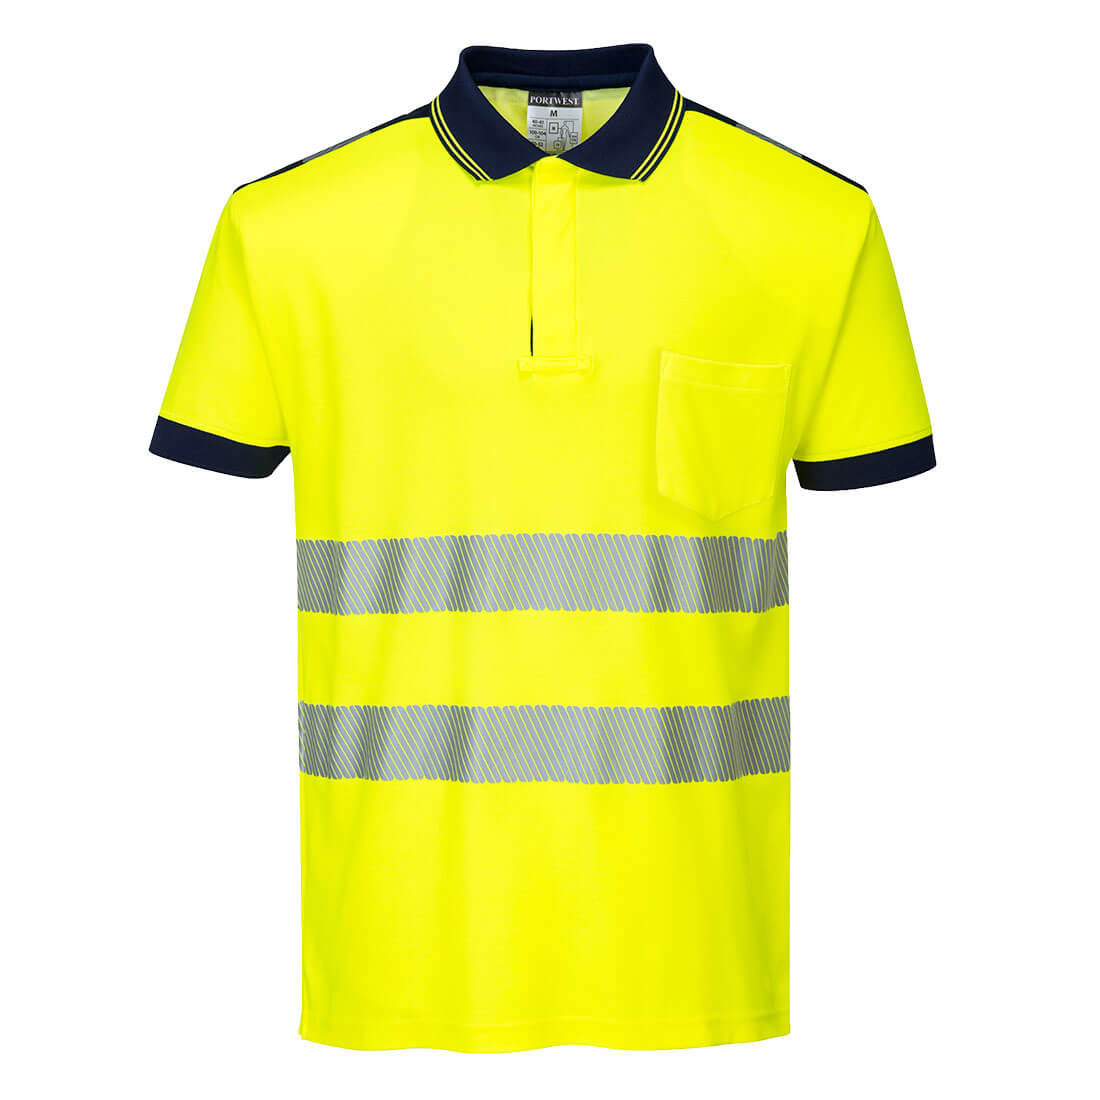 PORTWEST T180 PW3 HiVis Polo Shirt Short Sleeve Work CE Safety Top Comfort - Hamtons Direct